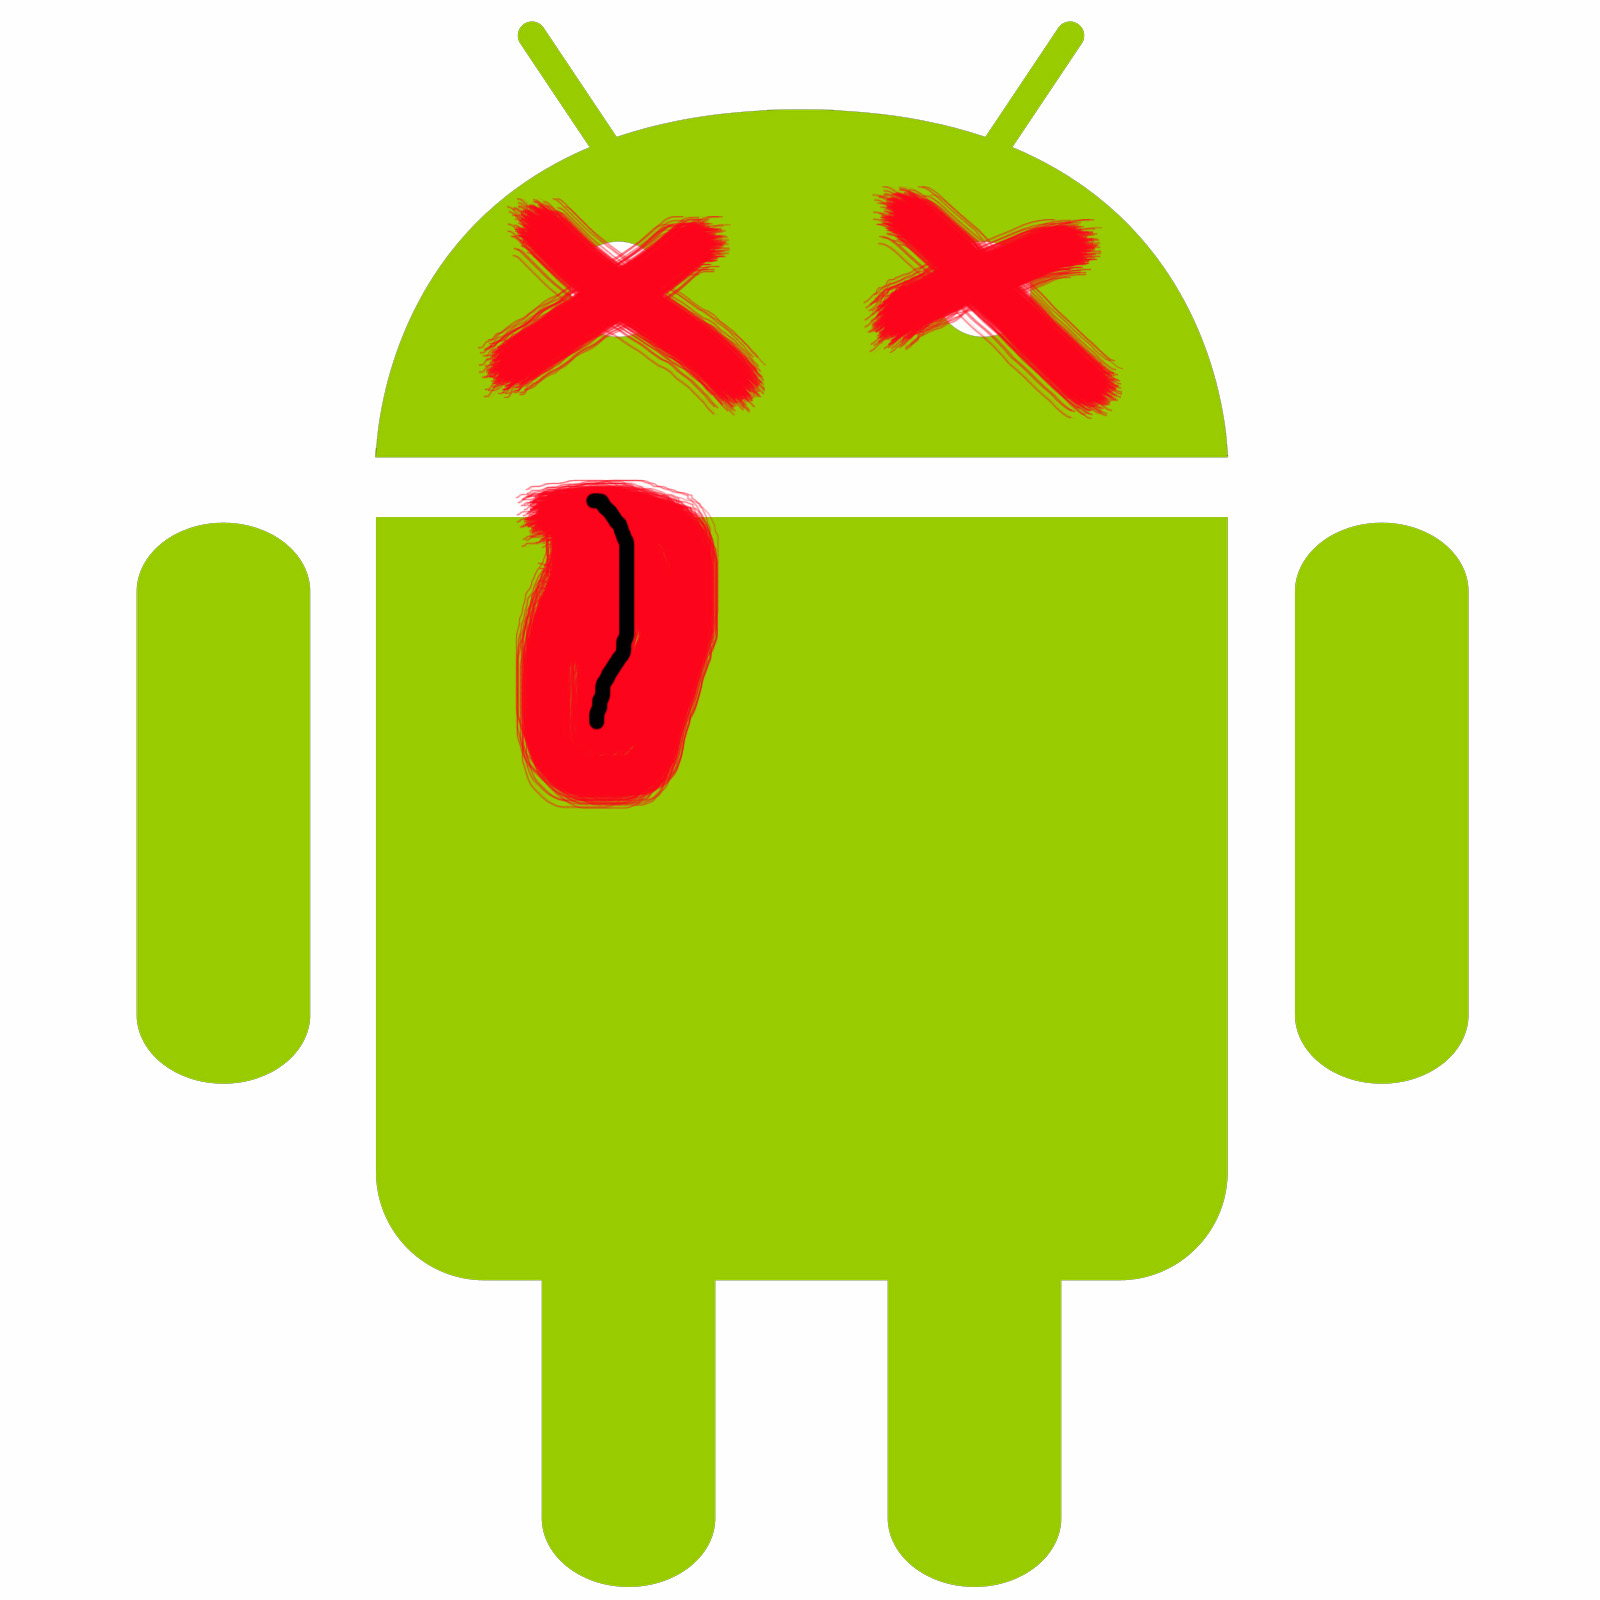 Dead Android after the HTC EVO 4G LTE Android 4.3 update